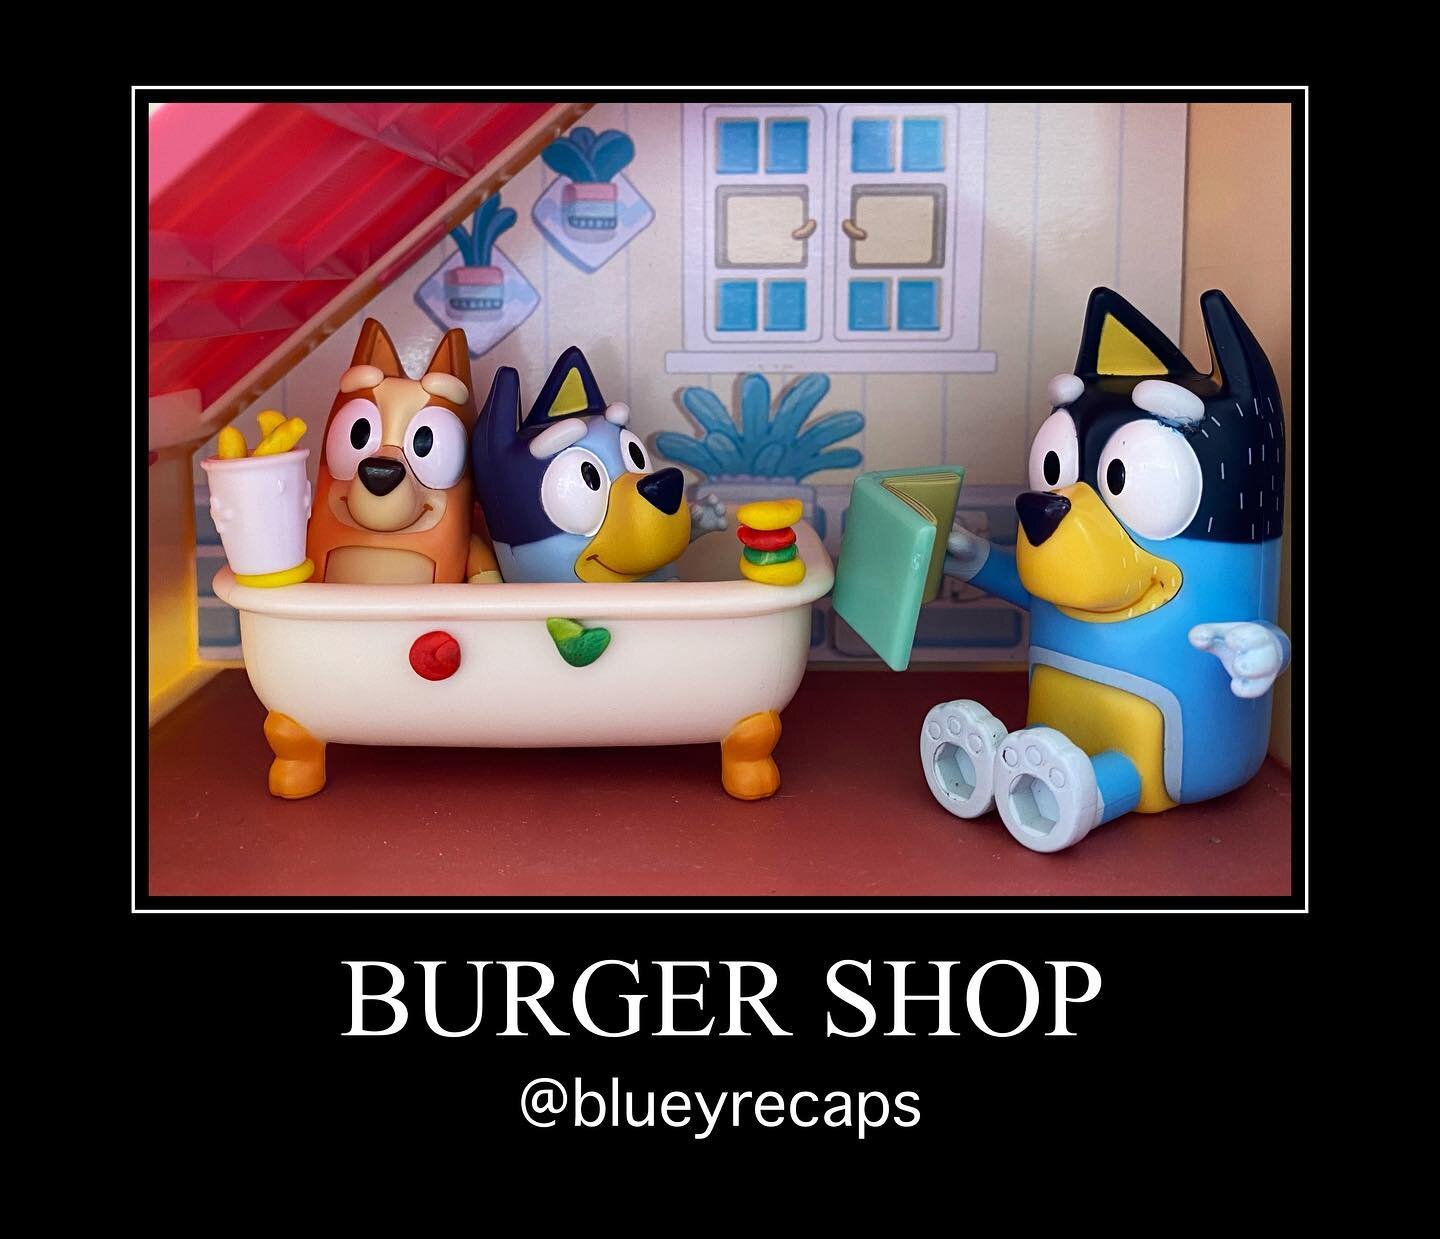 Bluey Recap: Burgershop (#2.36)
#bestbits: Bluey becoming the bank manager
#lifelesson: kids will do anything to stay up longer, and sometimes you have to be a &ldquo;meanie&rdquo; (adult) parent
.
It&rsquo;s bath time at The Heeler&rsquo;s and Chill